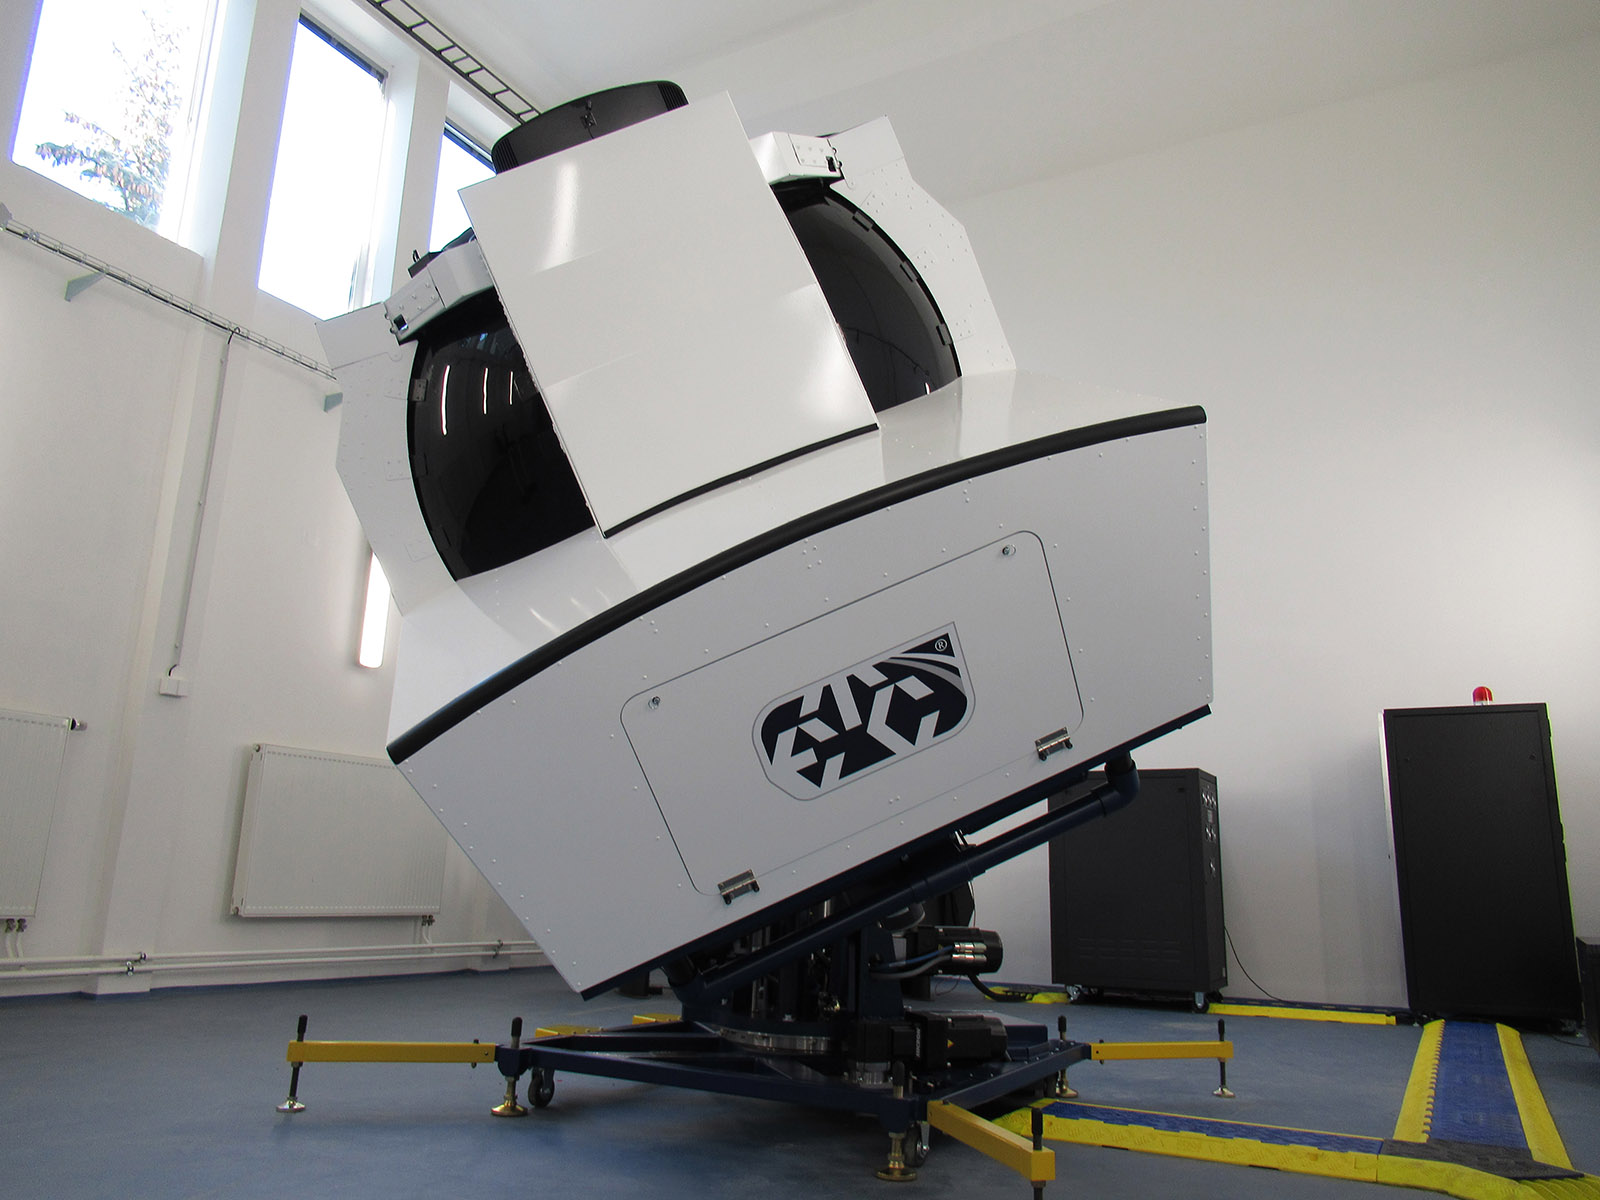 The GH-200 is a highly-versatile Spatial Disorientation Trainer for Fixed Wing and Rotary Wing